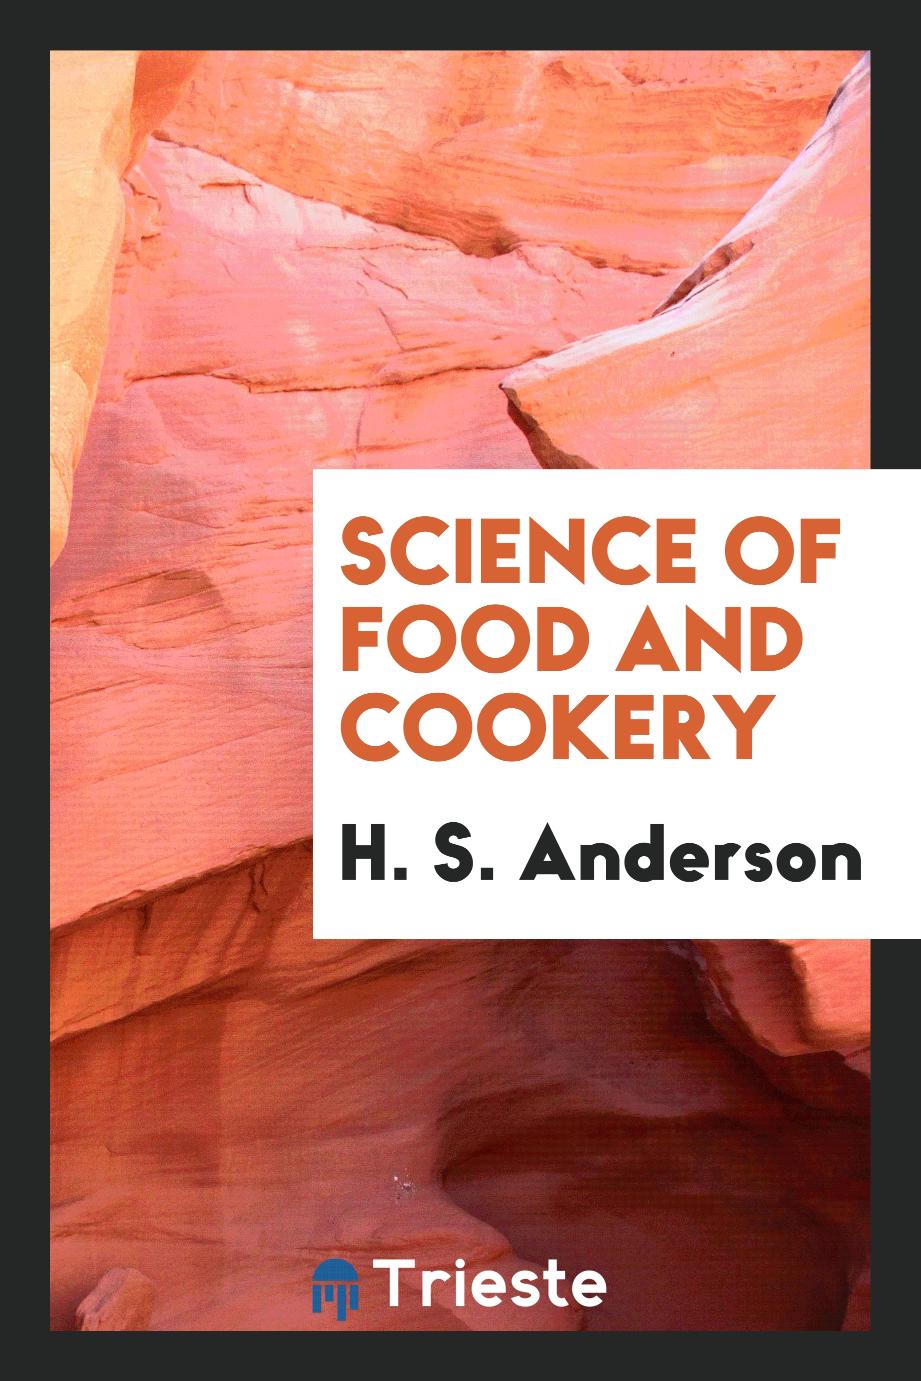 Science of food and cookery